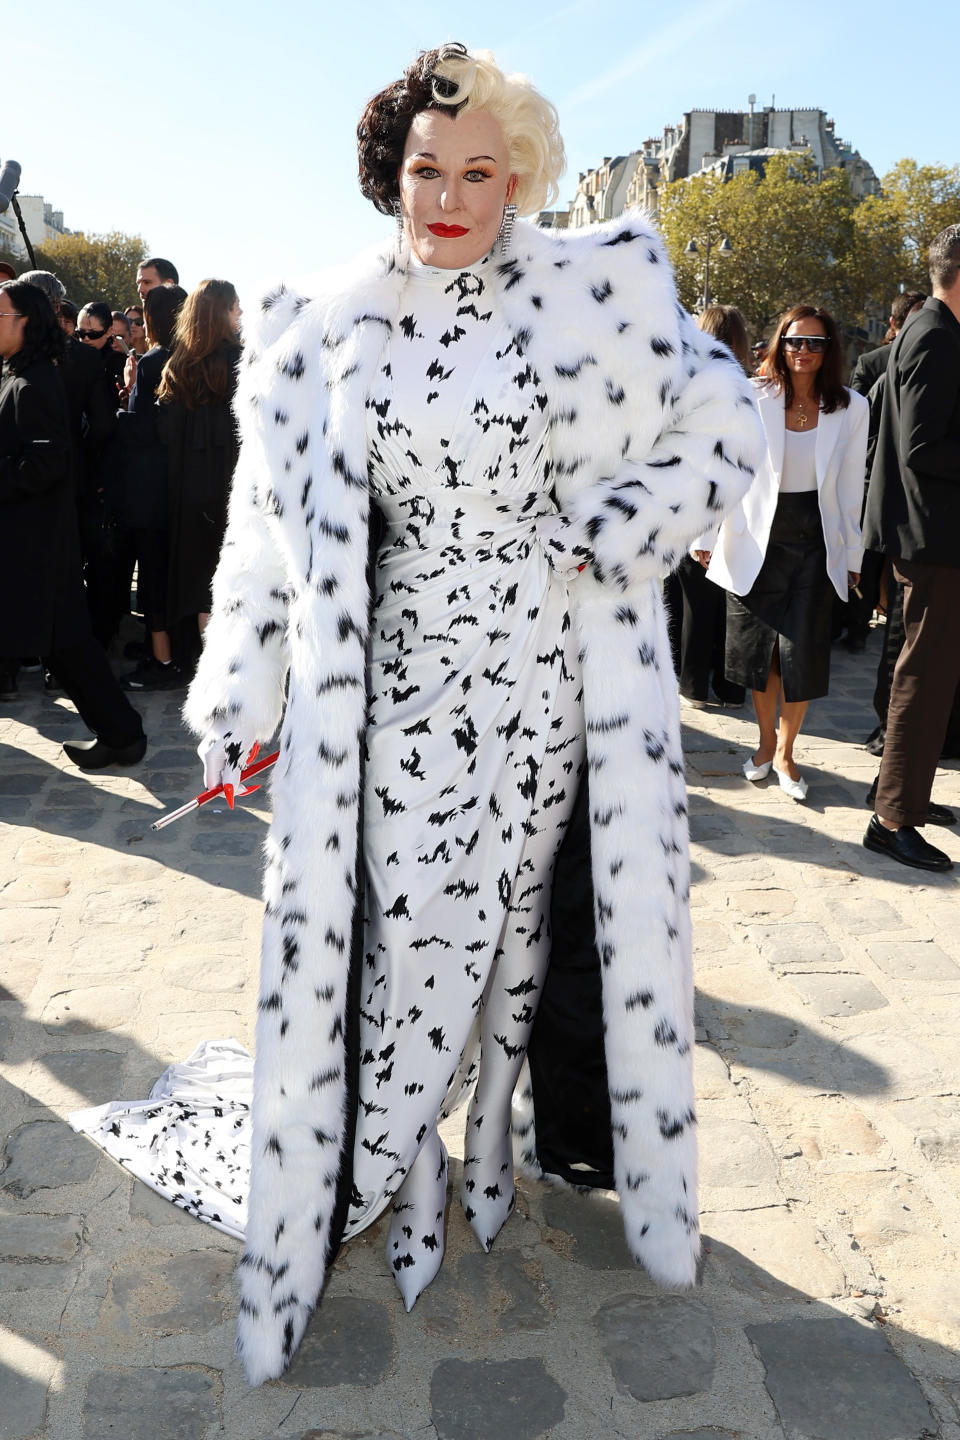 Alexis Stone dressed as Cruella de Vil in a spotted fur coat and long, flowing dress with similar pattern, holding a cigarette holder, posing outdoors at a likely public event